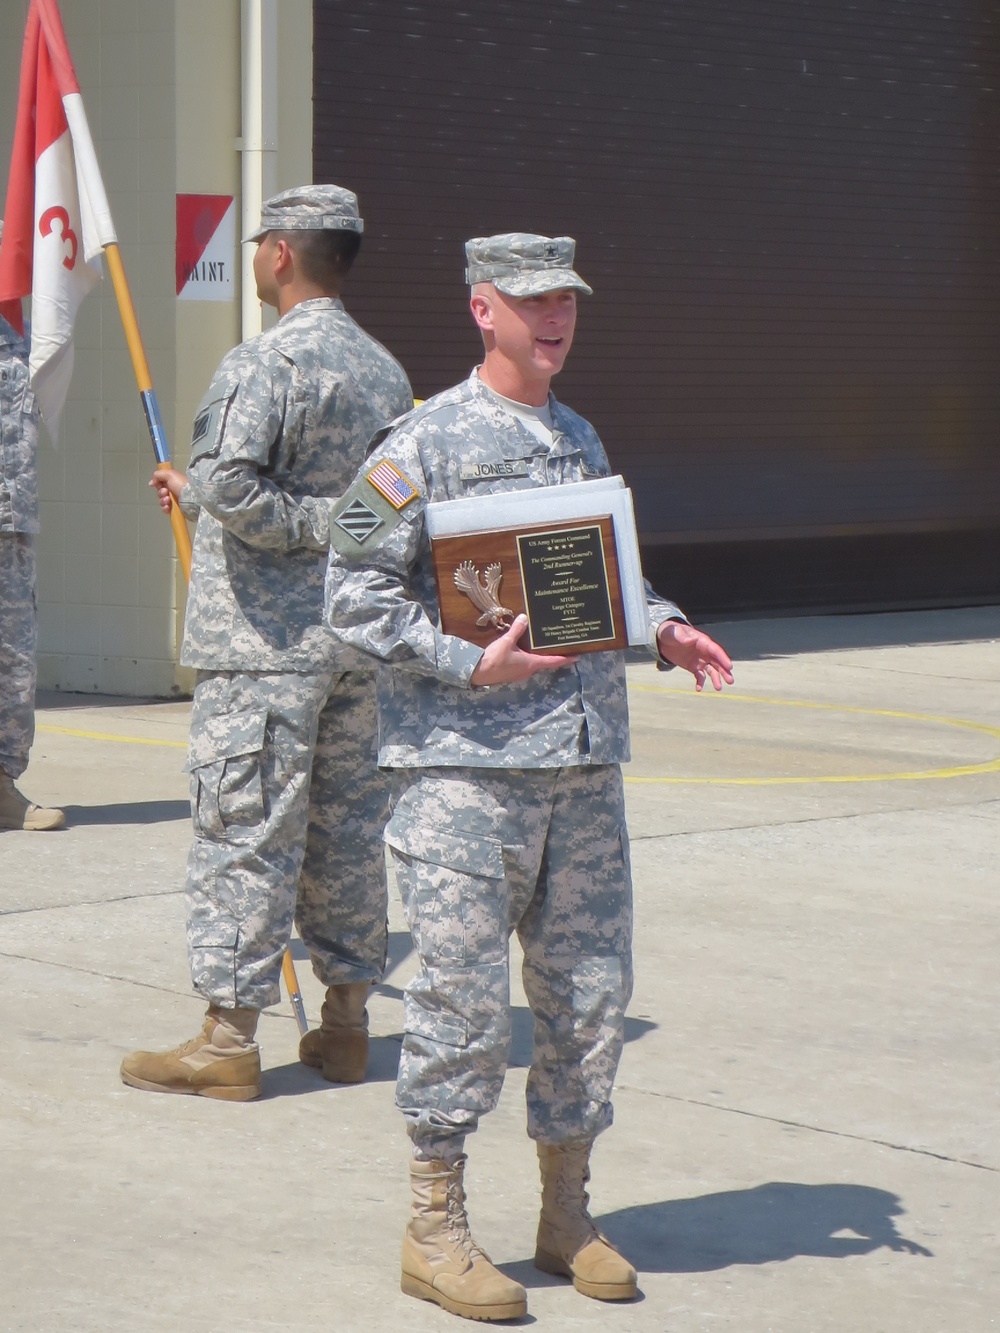 ‘Blackhawk’ Squadron awarded for excellence